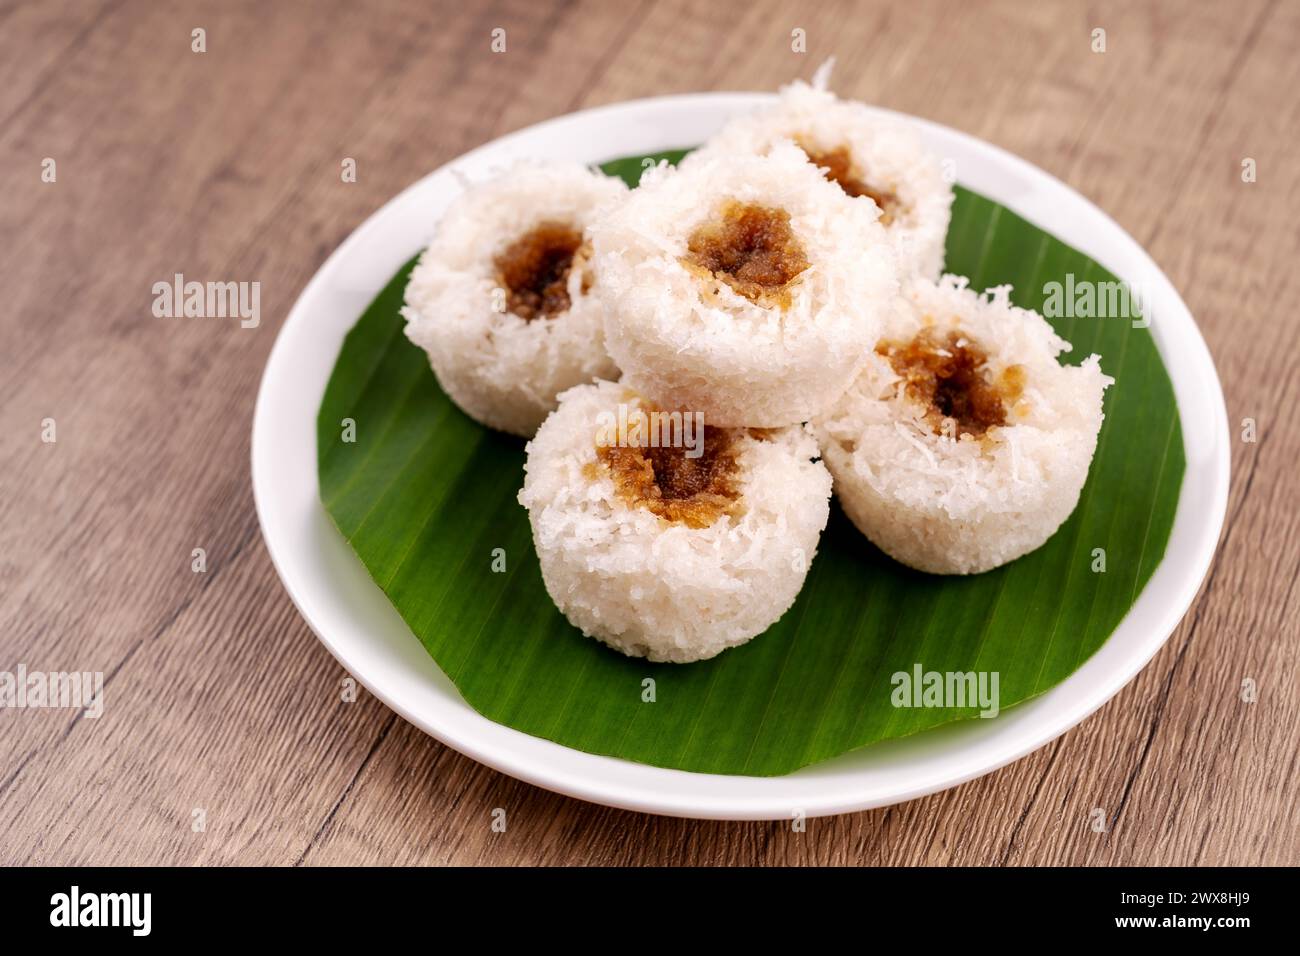 Putu bambu or steamed rice flour cake with grated coconut and palm sugar filling Stock Photo